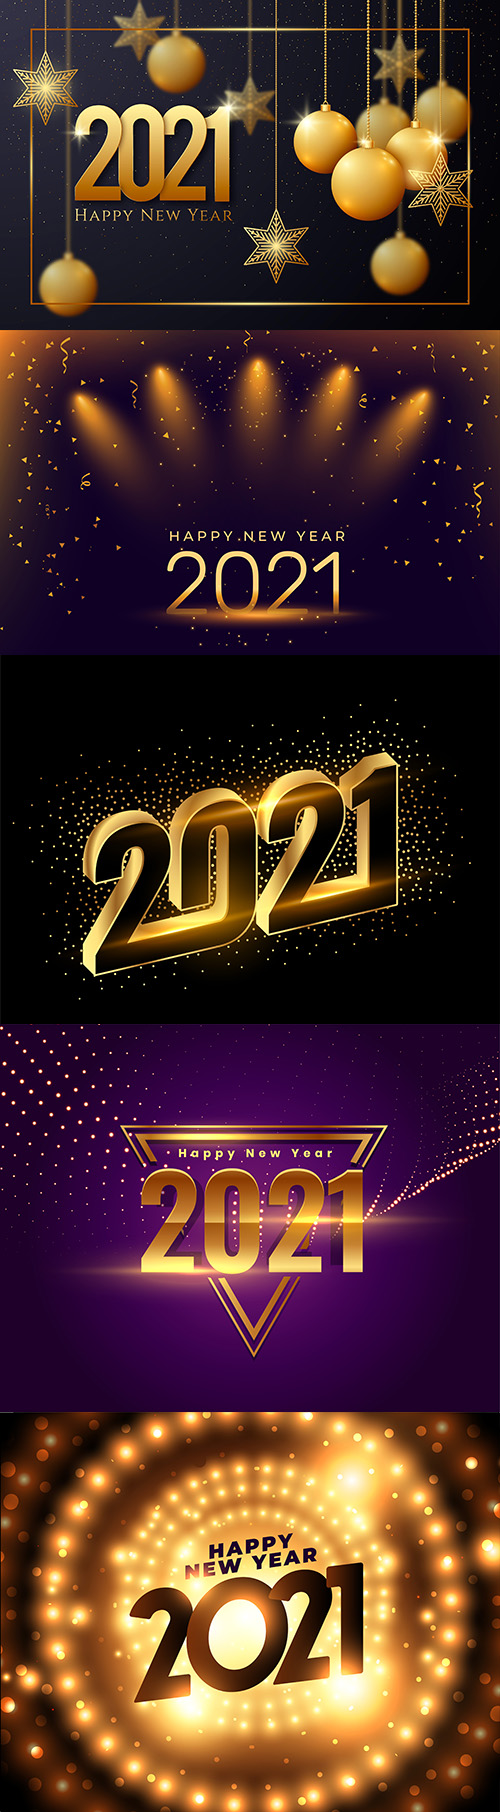 New Year 2021 background with realistic gold decor
